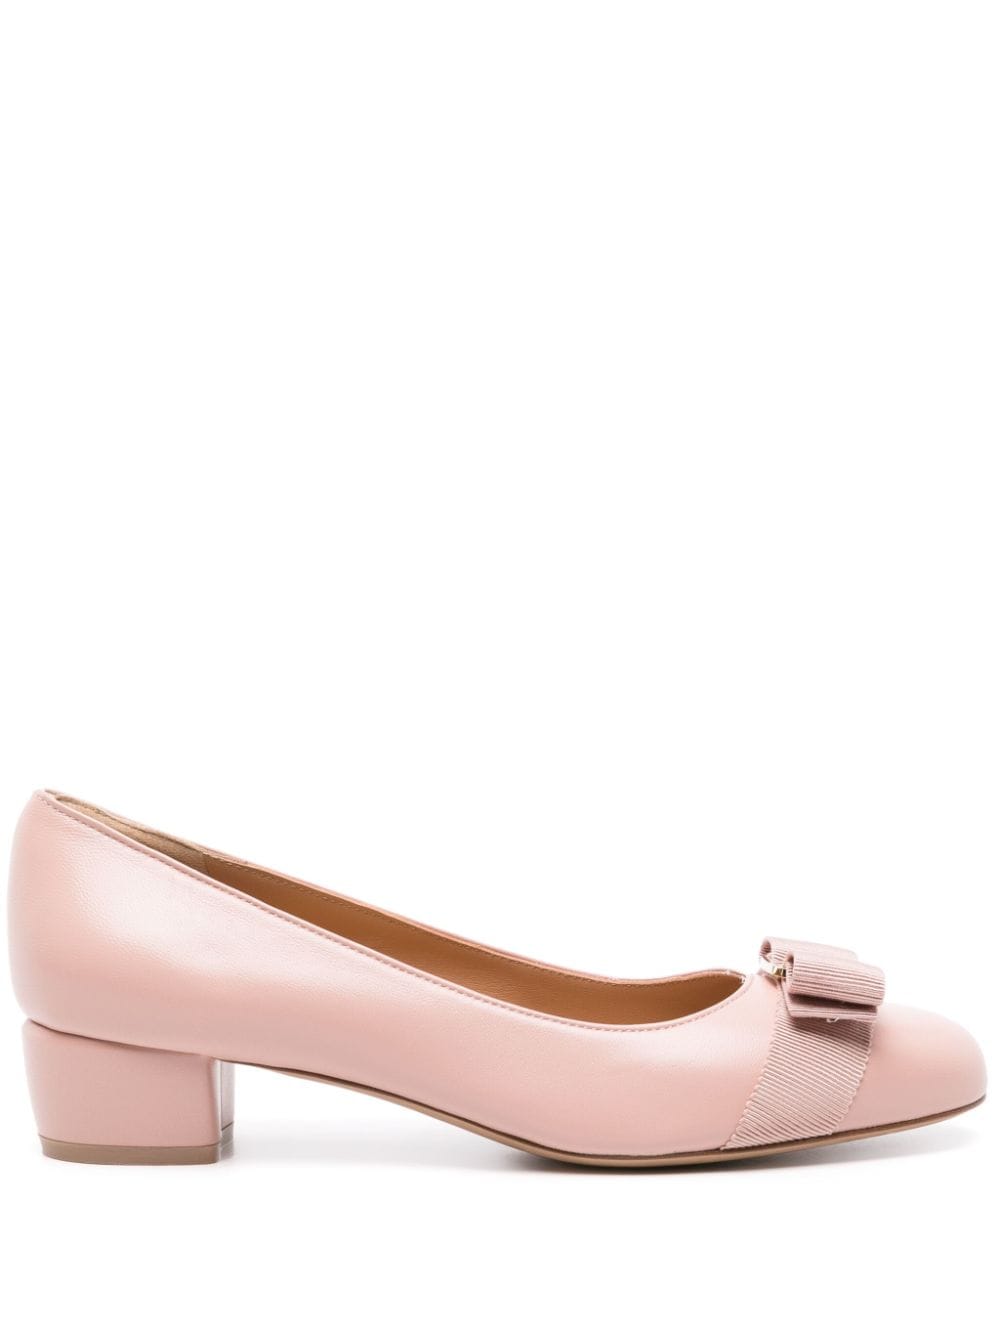 Ferragamo 30mm Vara Bow-detail Leather Pumps In Pink